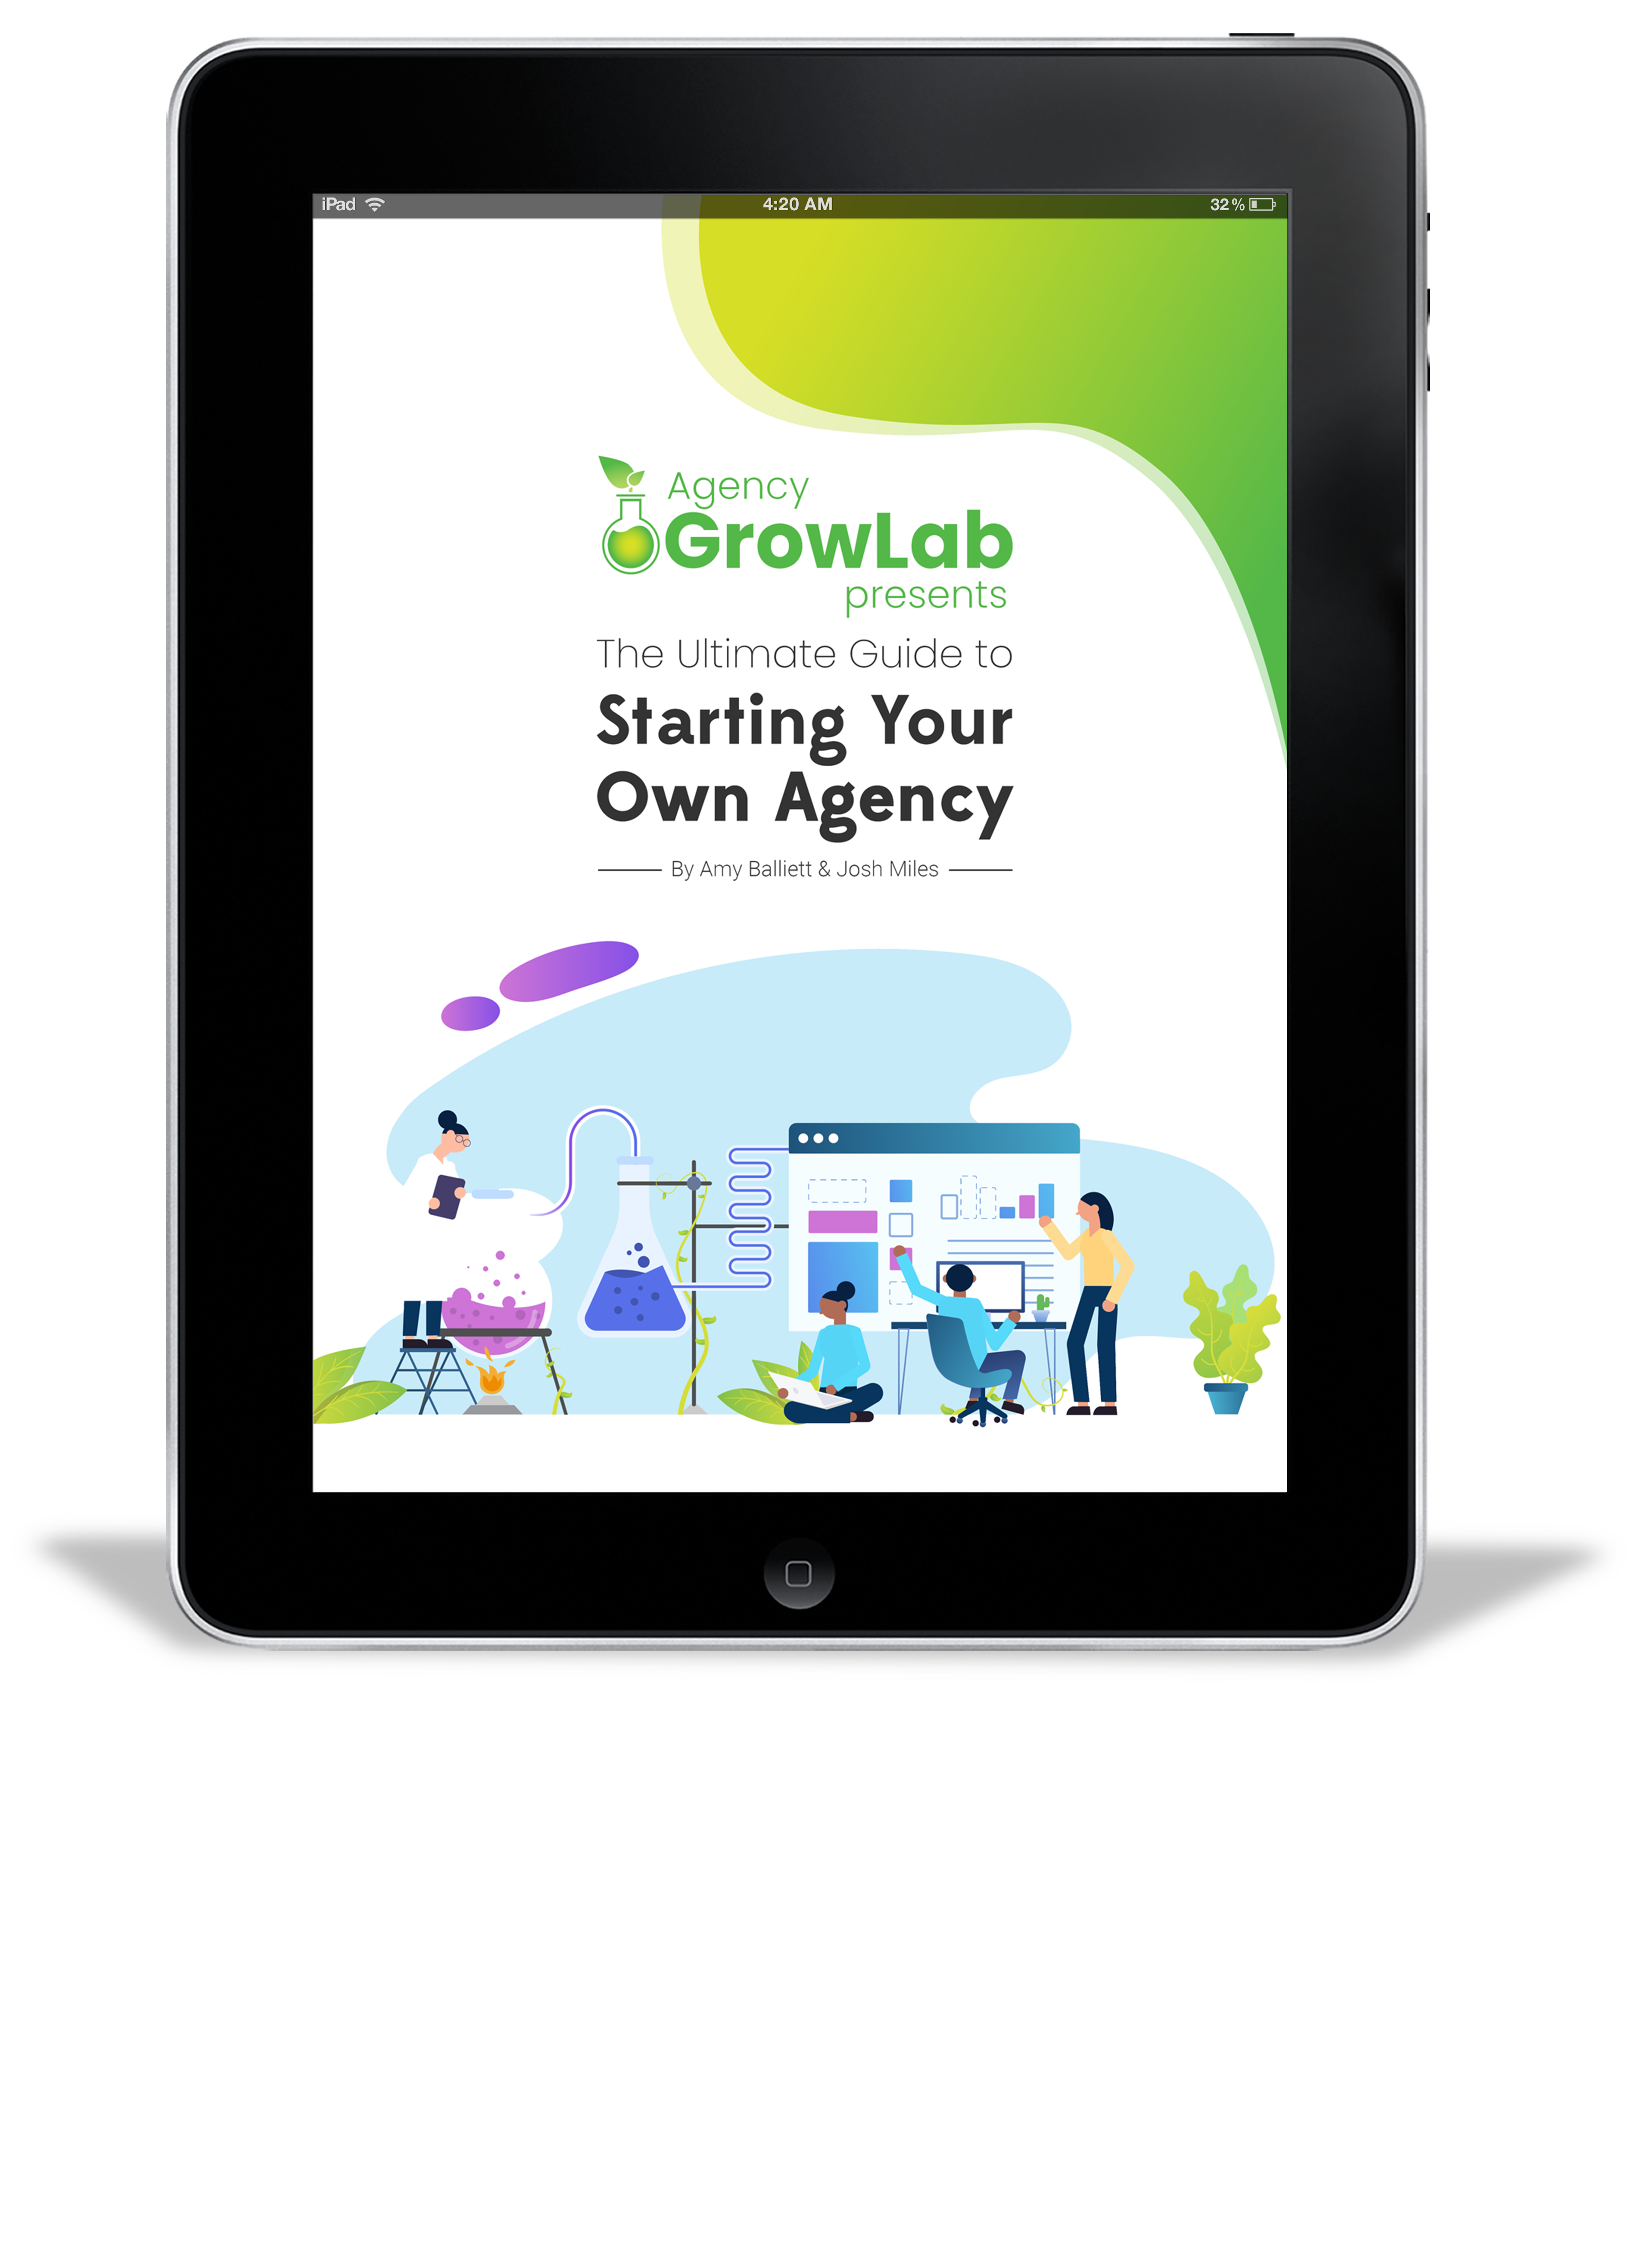 Dreaming about starting your first agency? We’ll help you get there.